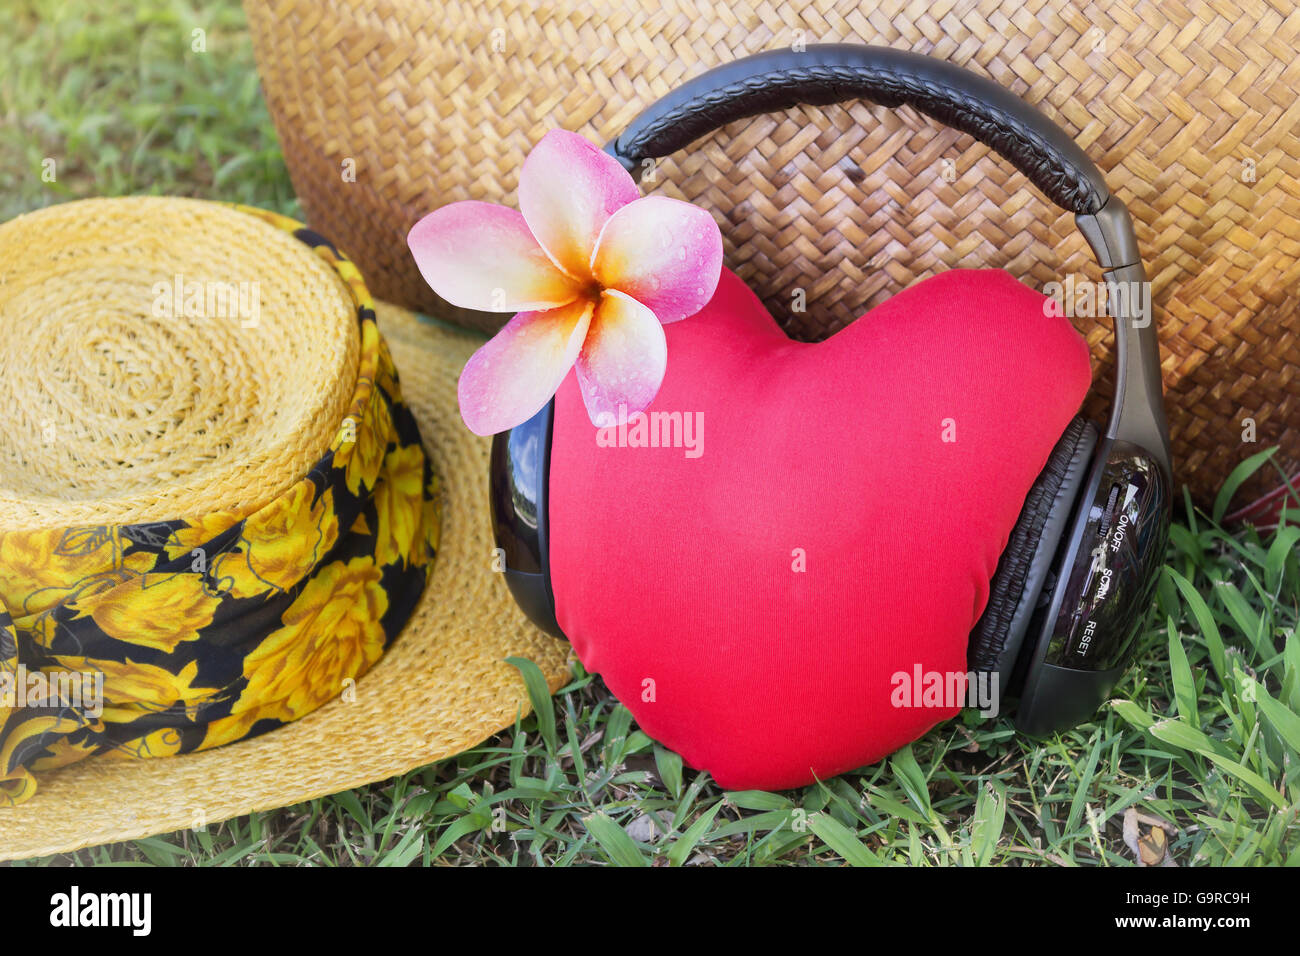 Red heart listen to music via headphone with pink flower frangipani or plumeria and summer hat and bag in background with relax  Stock Photo